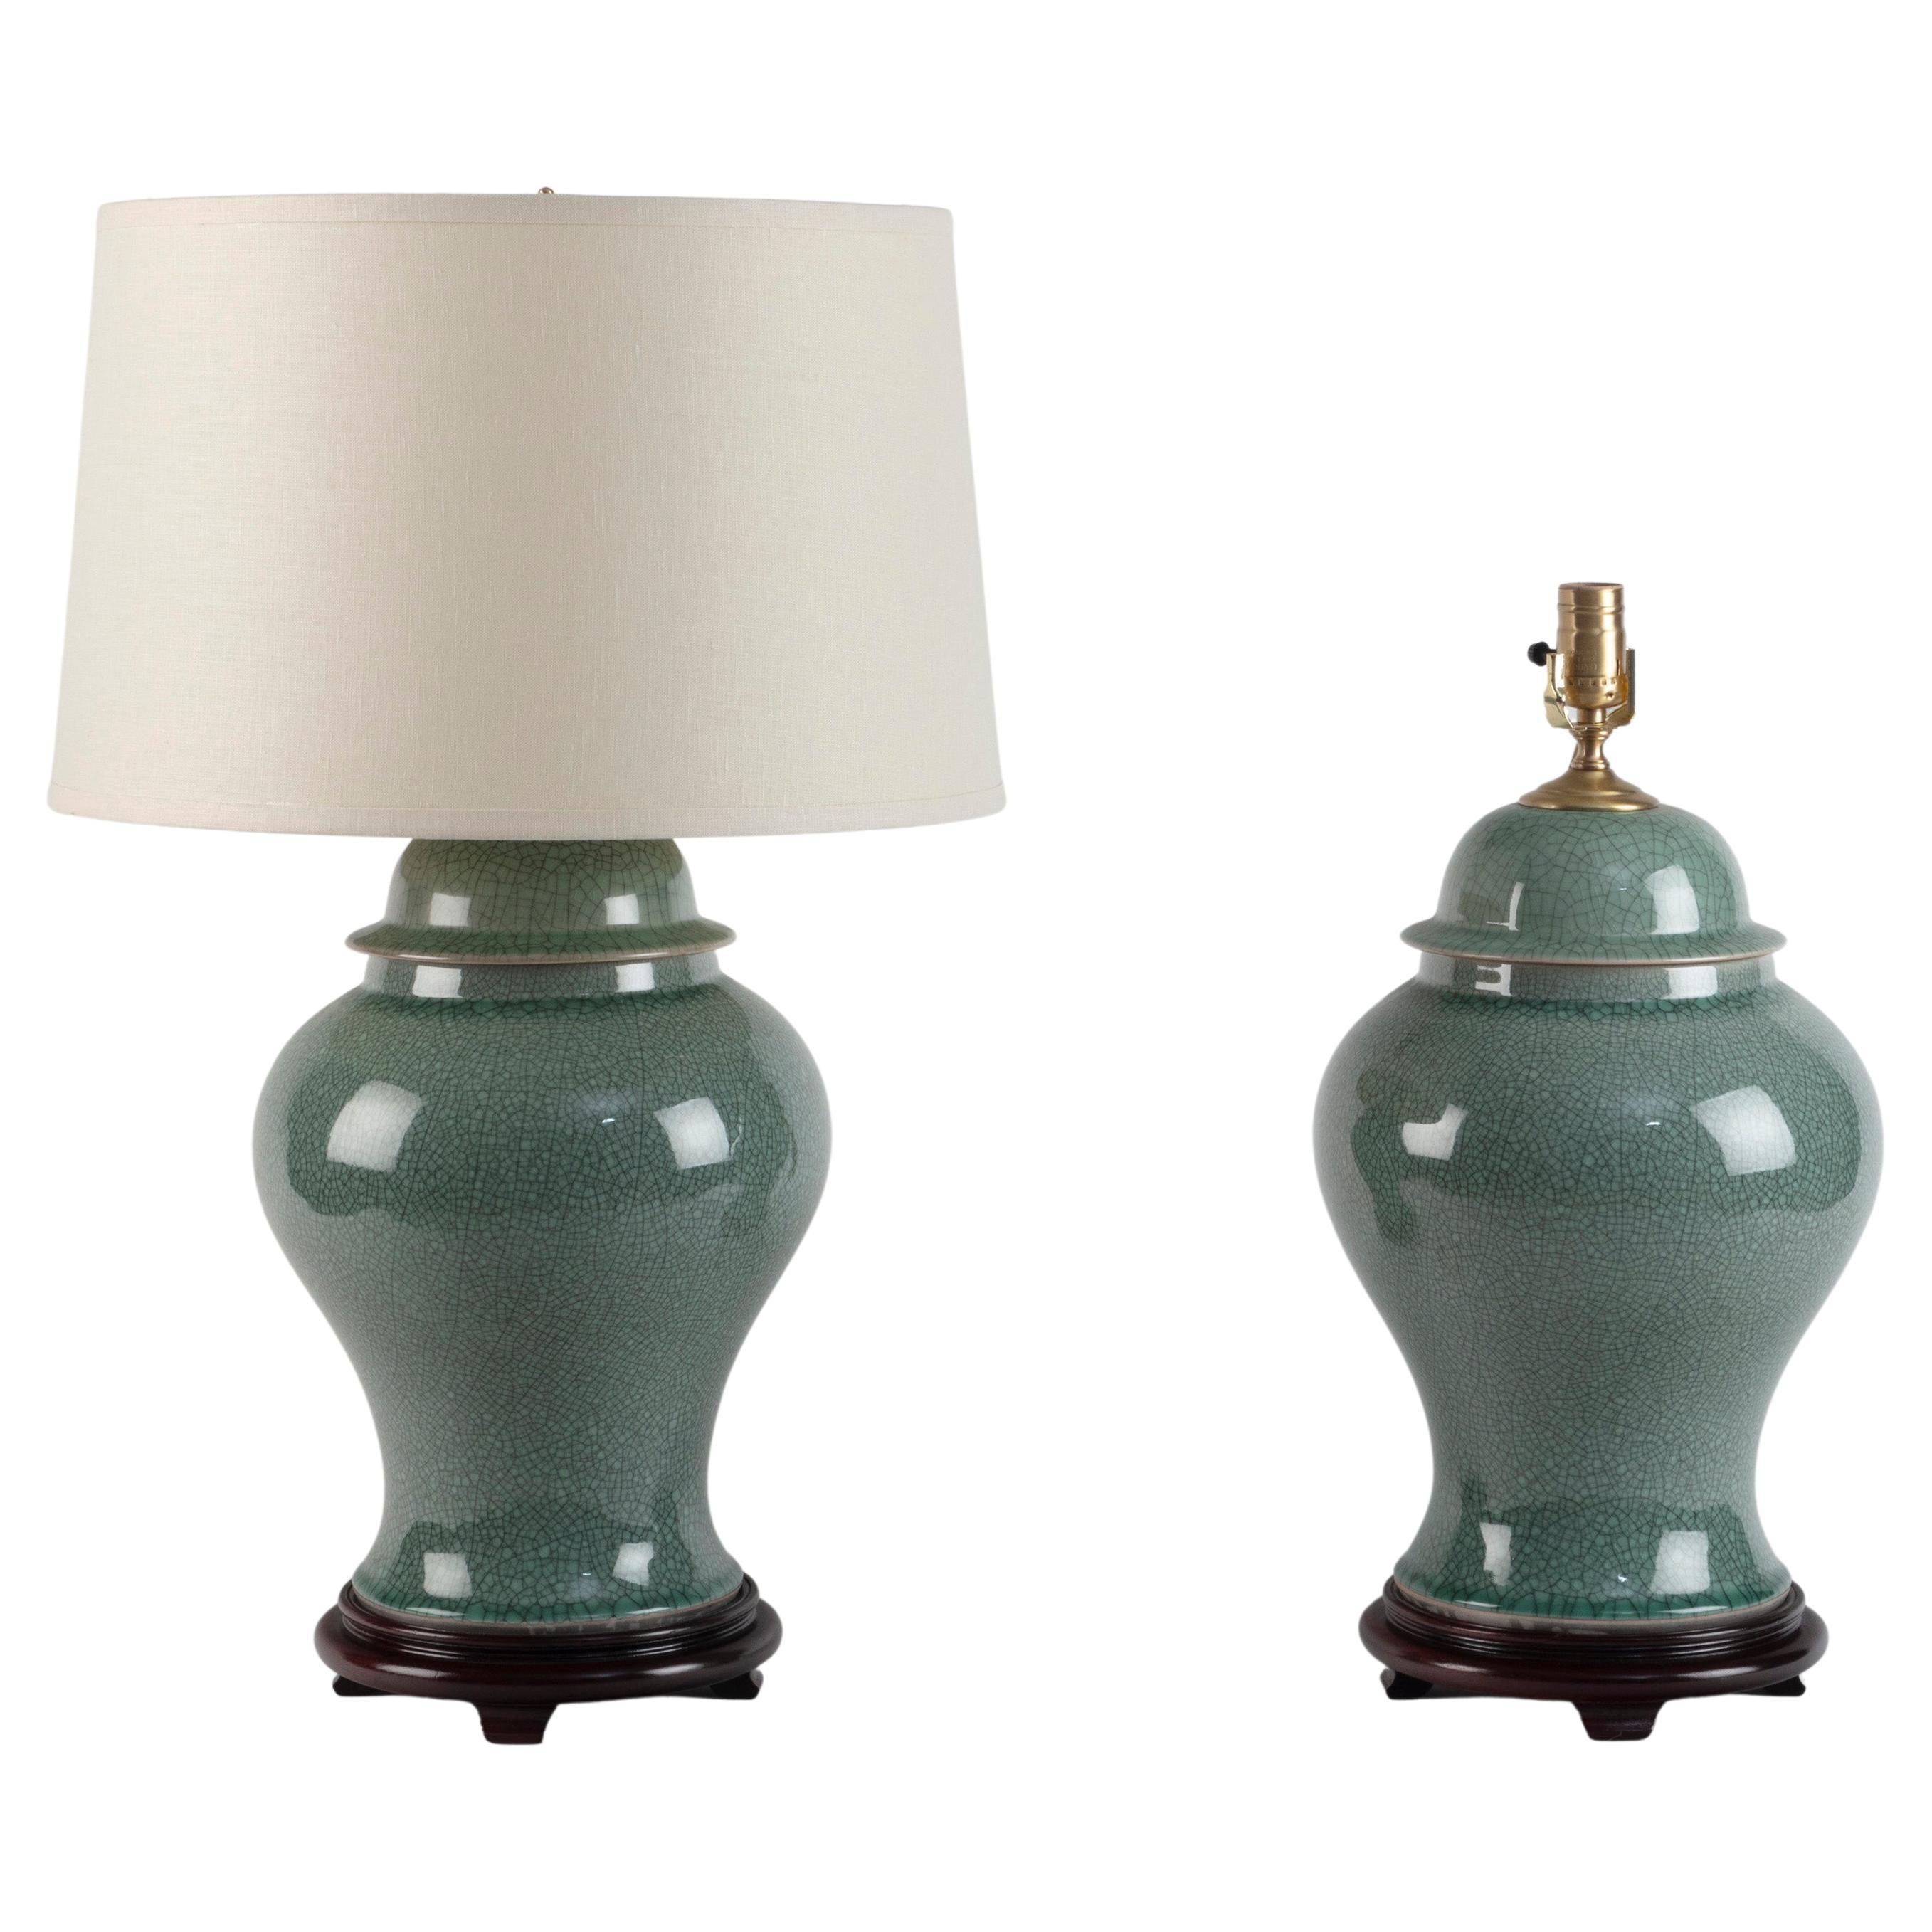 Pair of Chinese Crackle Celadon Temple Jar Table Lamps